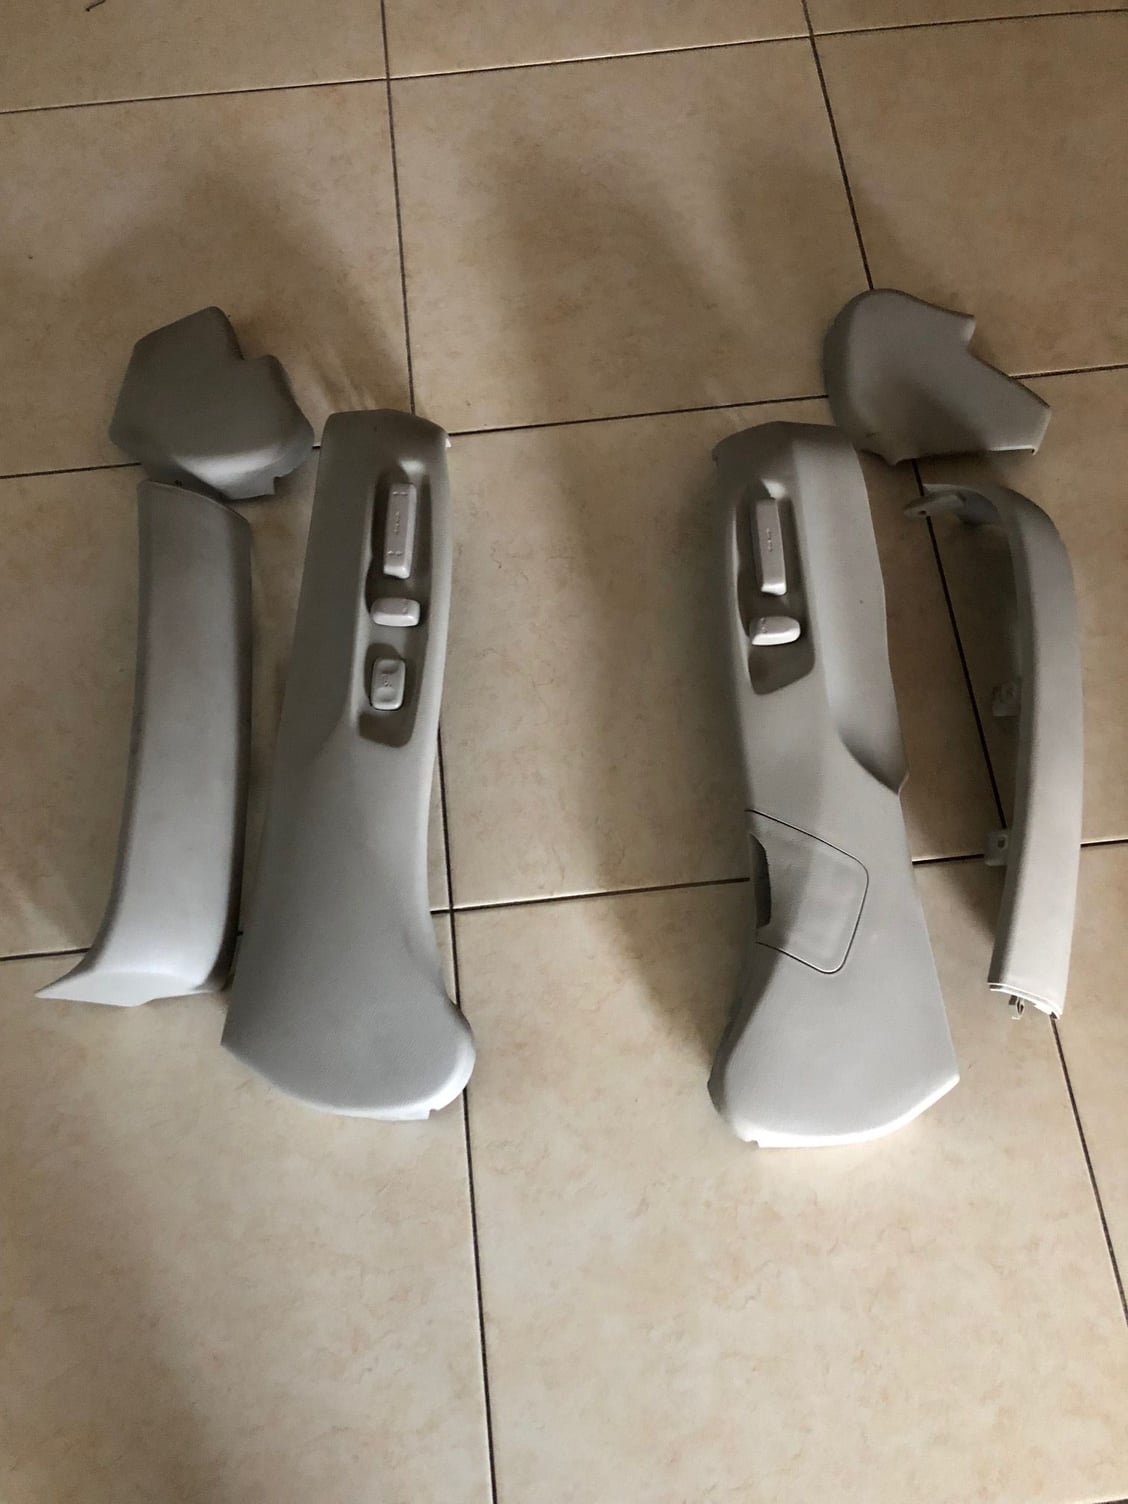 Interior/Upholstery - FS: Gray/Taupe Complete Interior Trim - Plastic Seat Covers - Seatbelts - Used - 2004 to 2008 Acura TL - Miami, FL 33126, United States